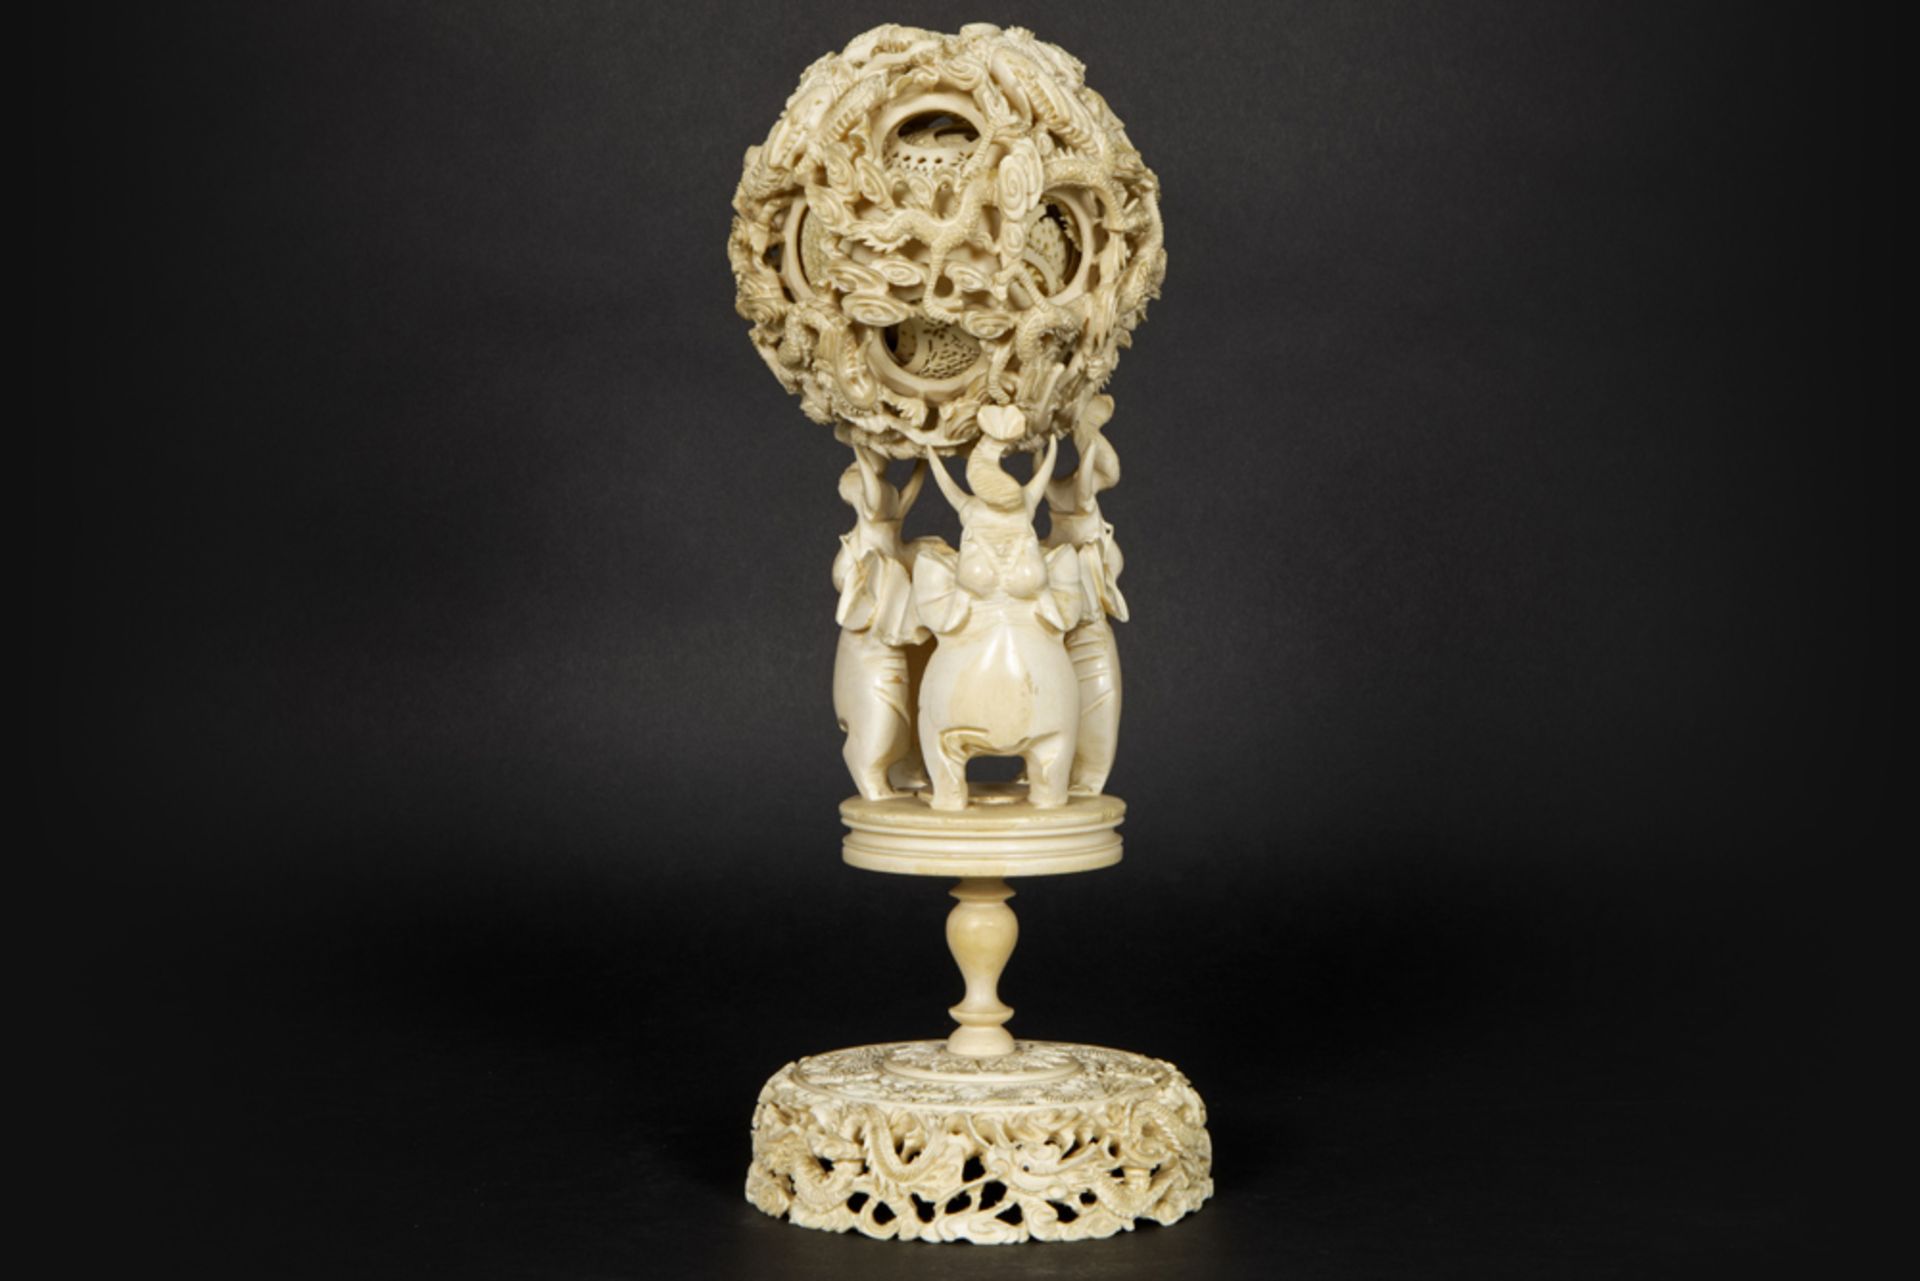 19th Cent. Chinese Qing period "Canton Ball" on a stand with elephants - typical fine Cantonese work - Bild 2 aus 5